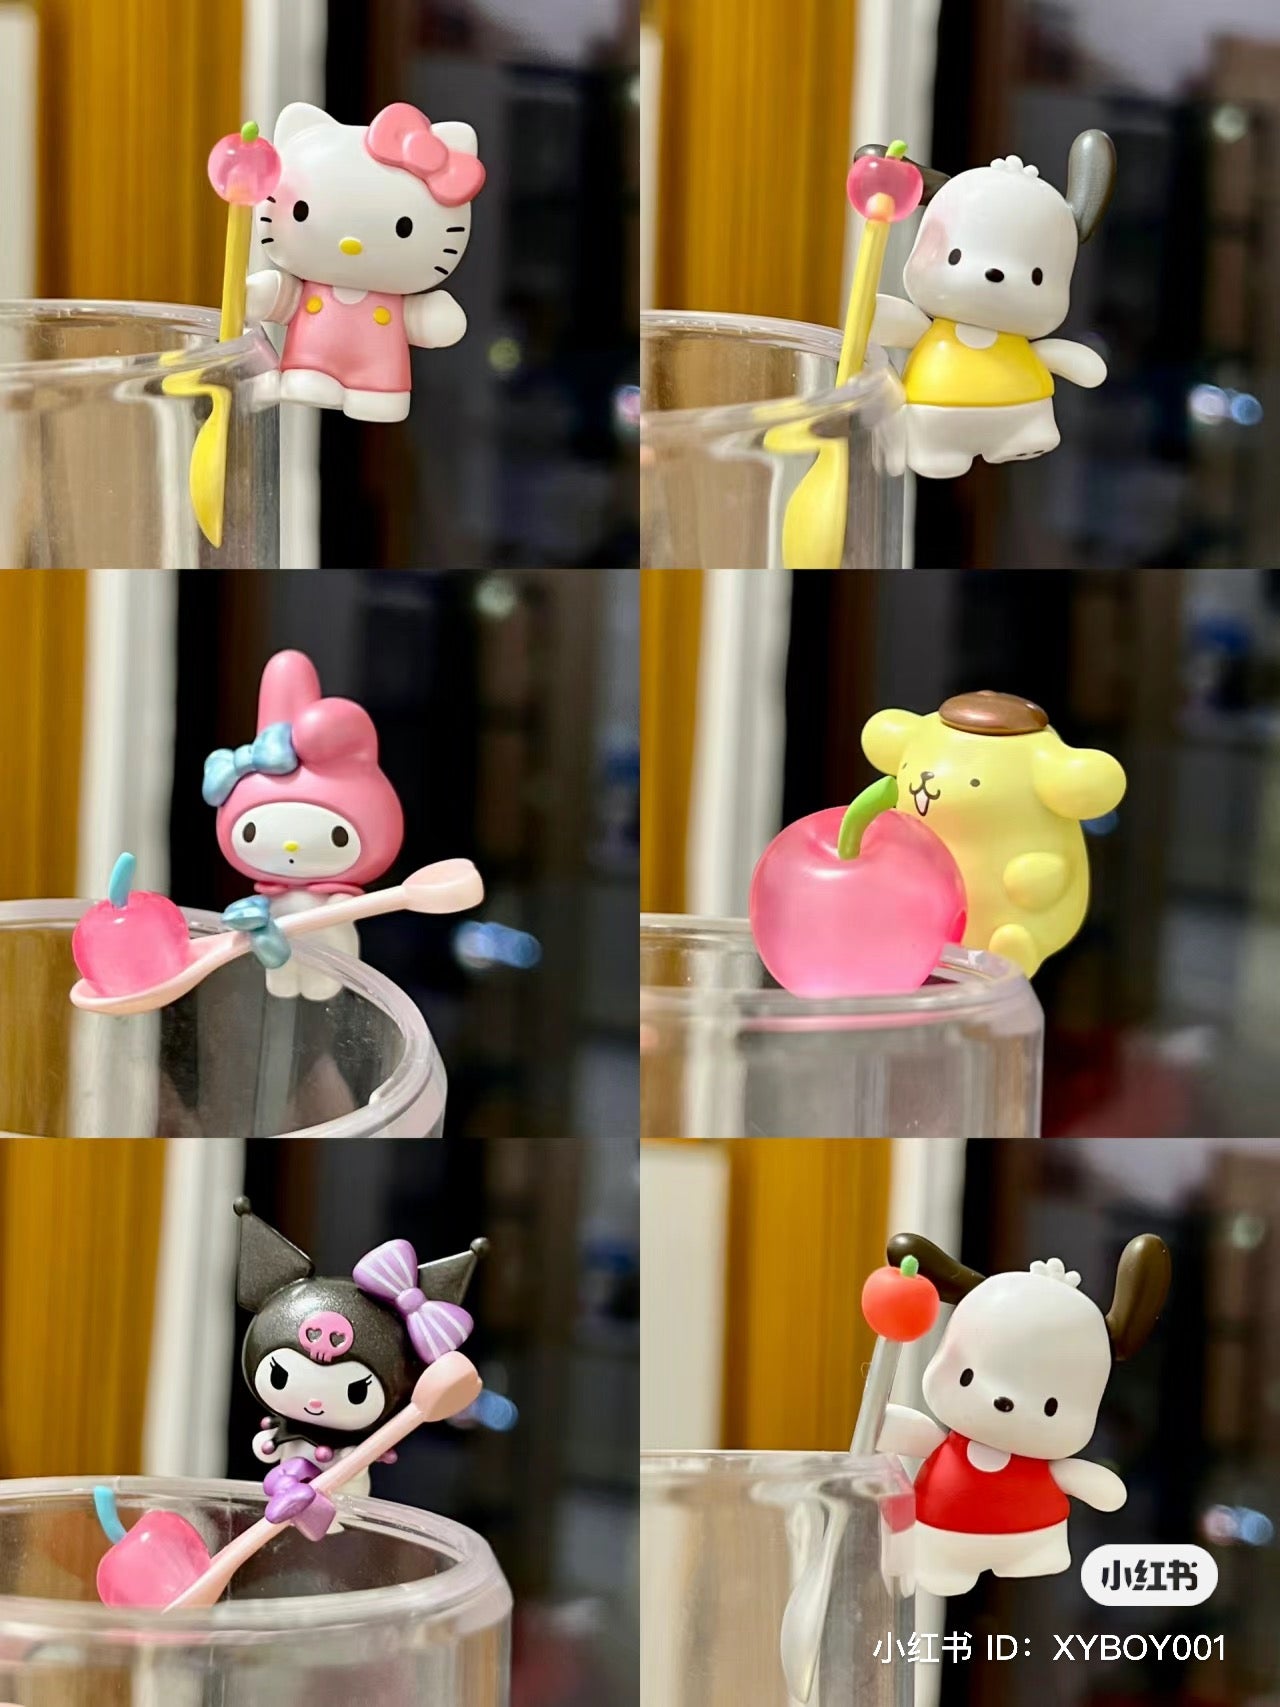 Sanrio characters Cherry Series Moetch Bean Blind Bag featuring various toy figurines, including Hello Kitty and other cartoon characters, holding different items.